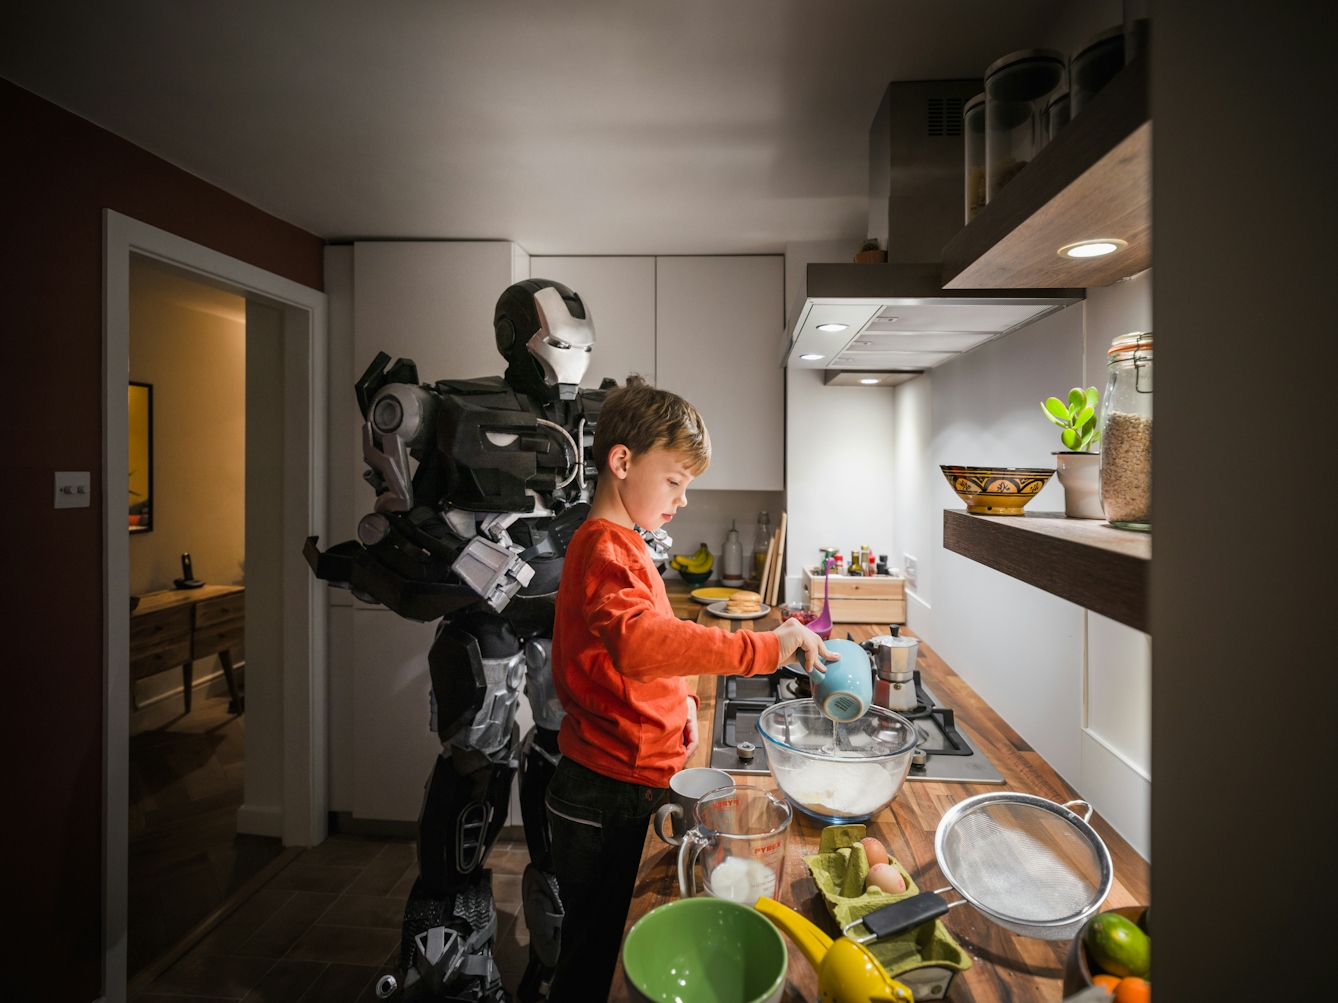 Photograph of a young boy standing at a kitchen countertop mixing the ingredients for pancakes. Behind him stands a large robot holding a spatular, ready to help make the pancakes.